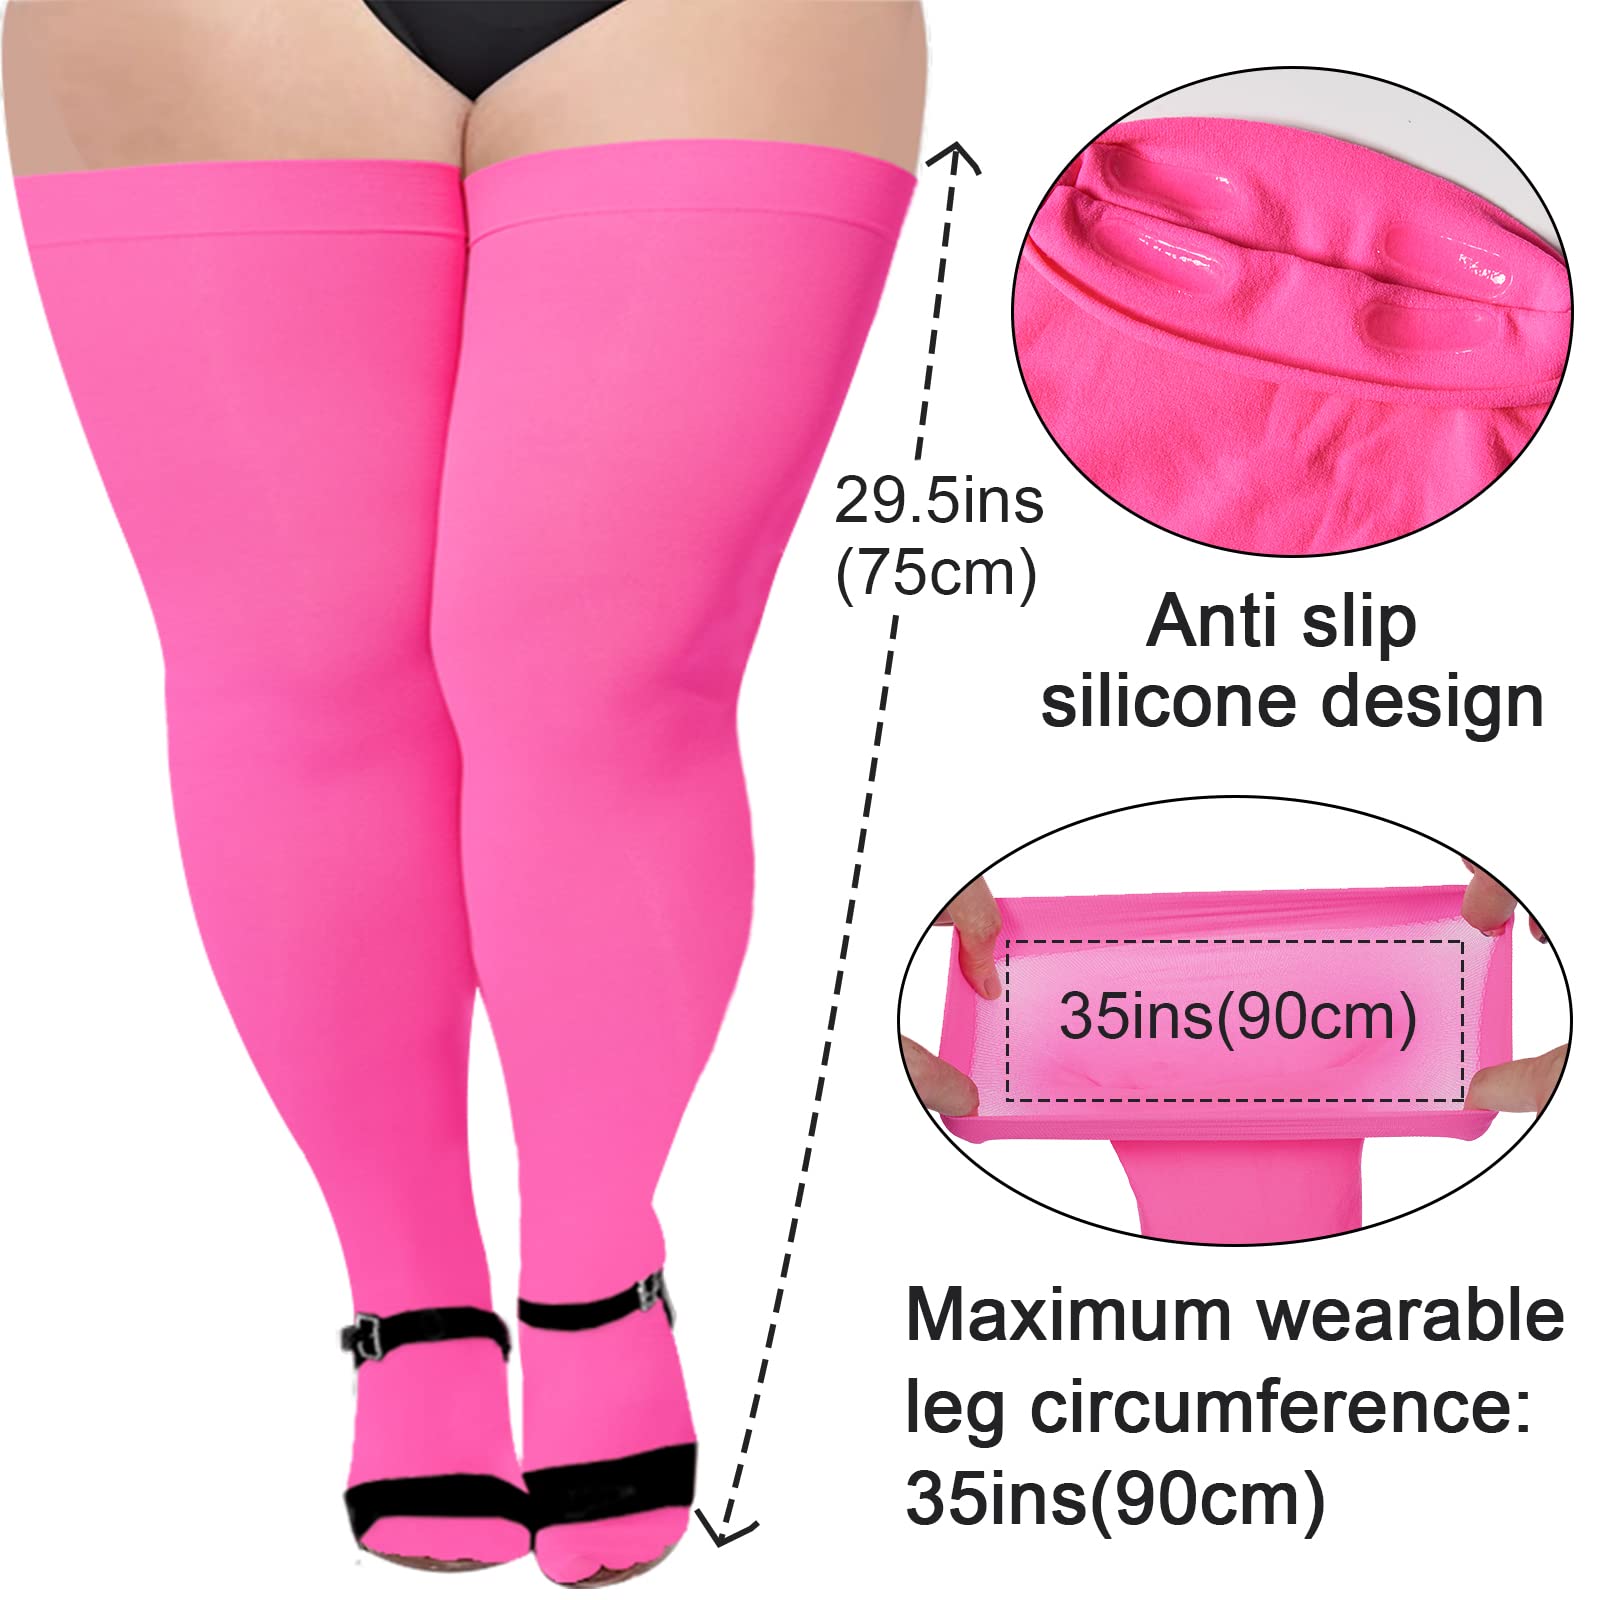 3 Pairs Plus Size Opaque Thigh High Socks-Black+white+pink - Moon Wood